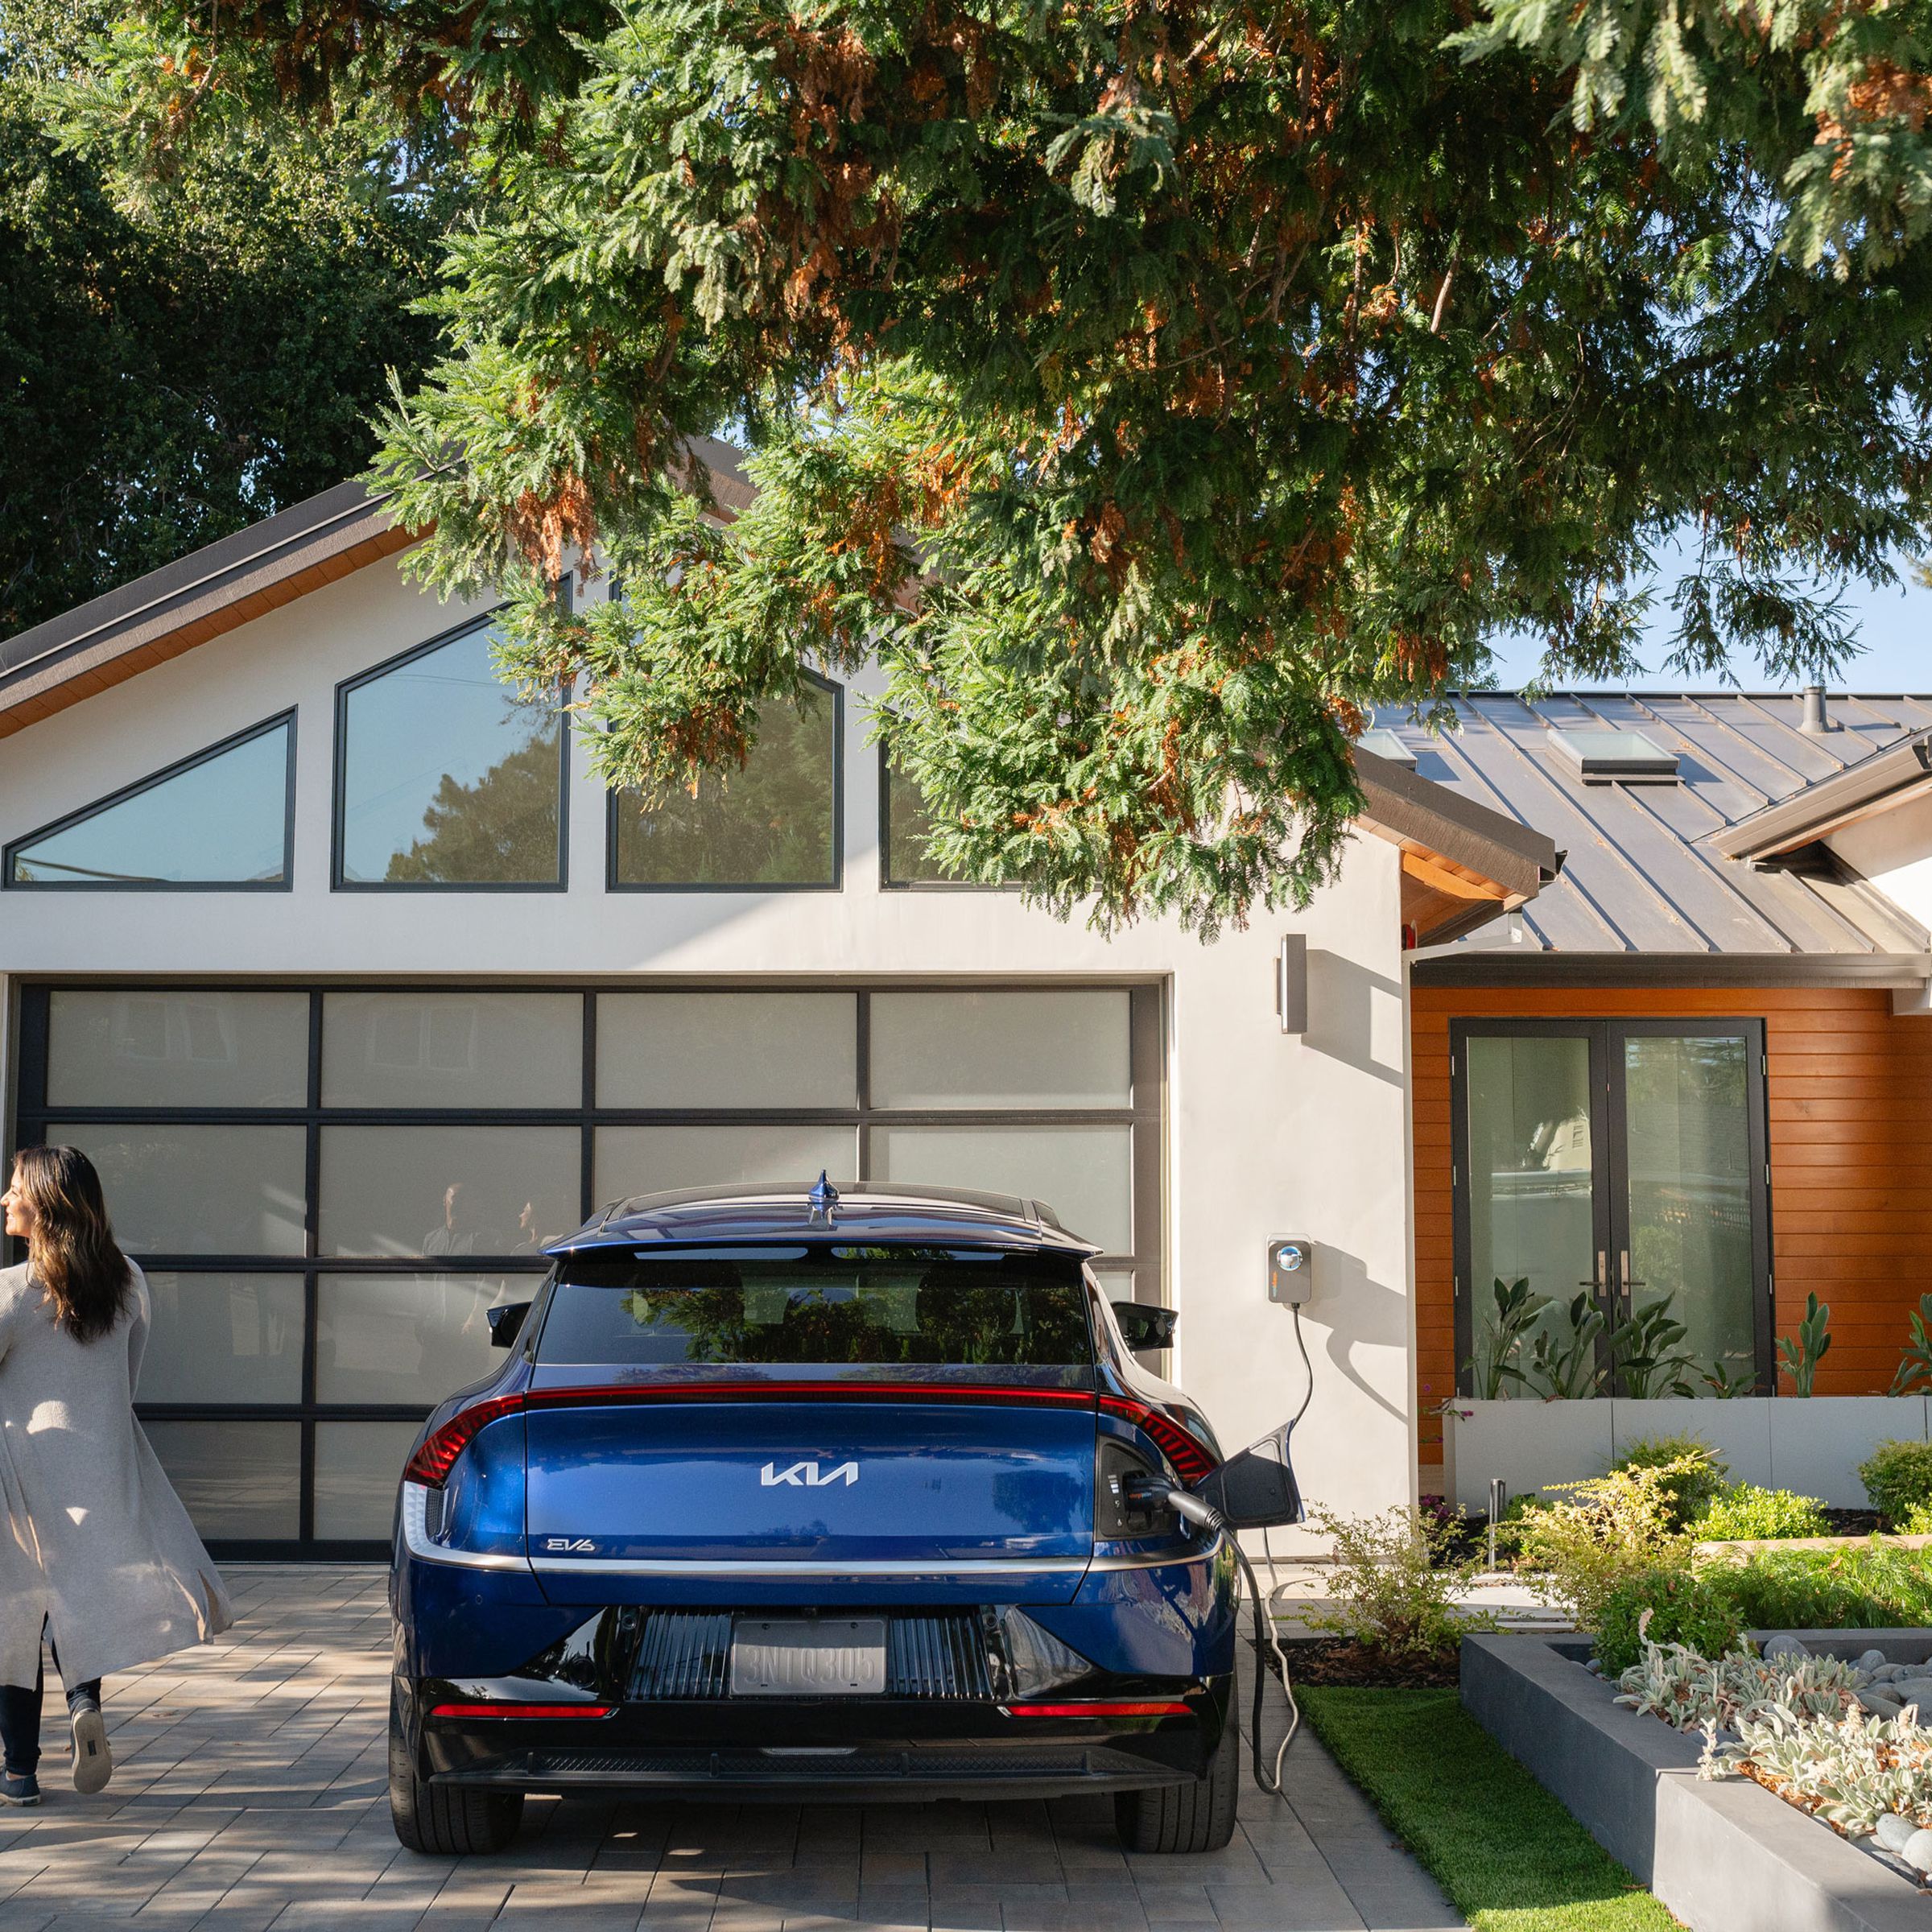 modern house with blue kia ev6 parked in front of garage with charge point charger Hooked up, and two people holding hands walking away from the car